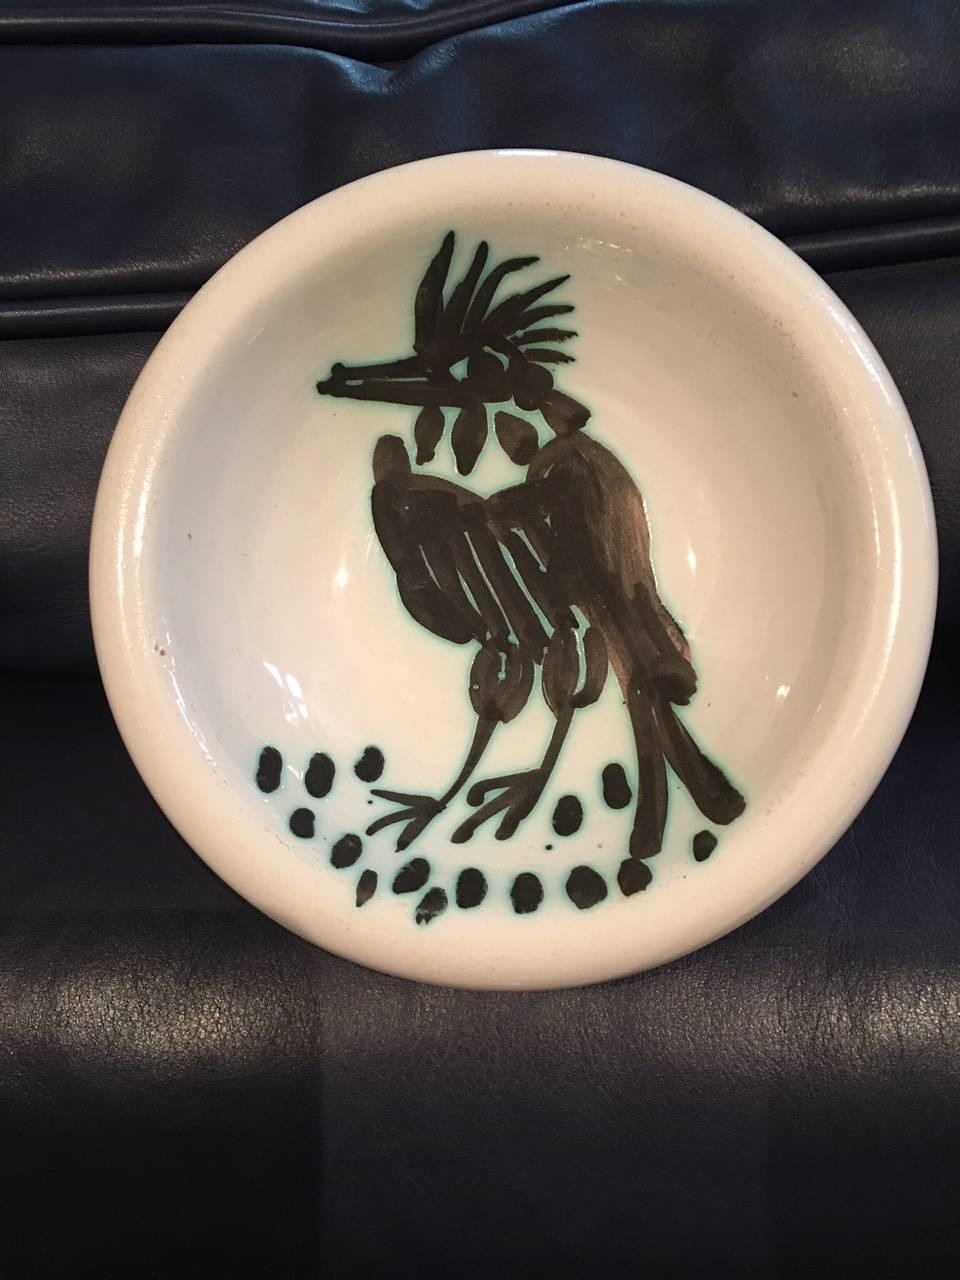 Oiseau a la Hoppe Ramie 173 from Collection of Madoura Ceramics - Sculpture by Pablo Picasso